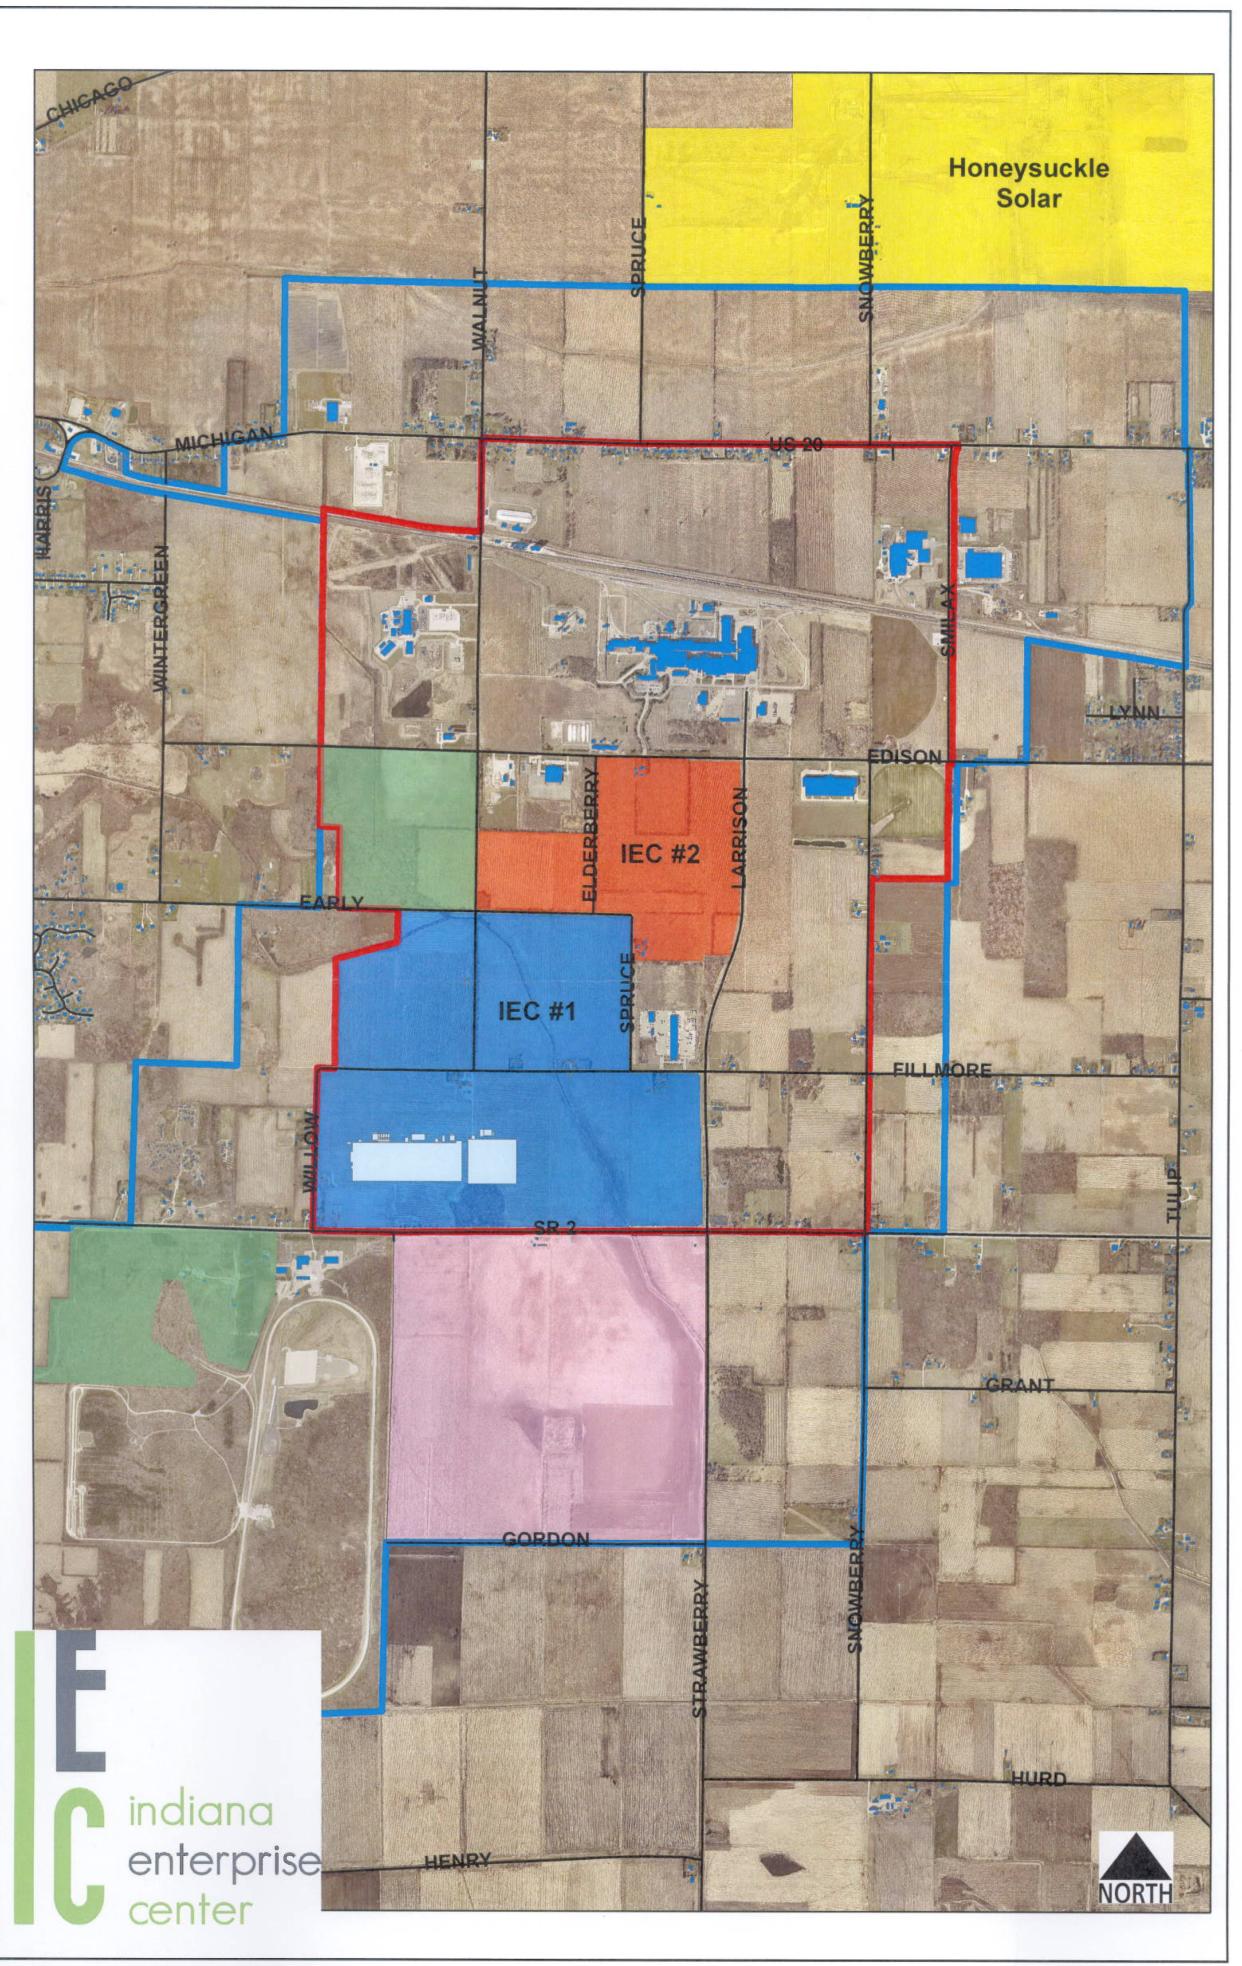 The area that is blue in the middle of the map is the location of the GM/Samsung SDI plant. The shaded area northeast and south of the GM/Samsung plant is the proposed location of a massive data center.